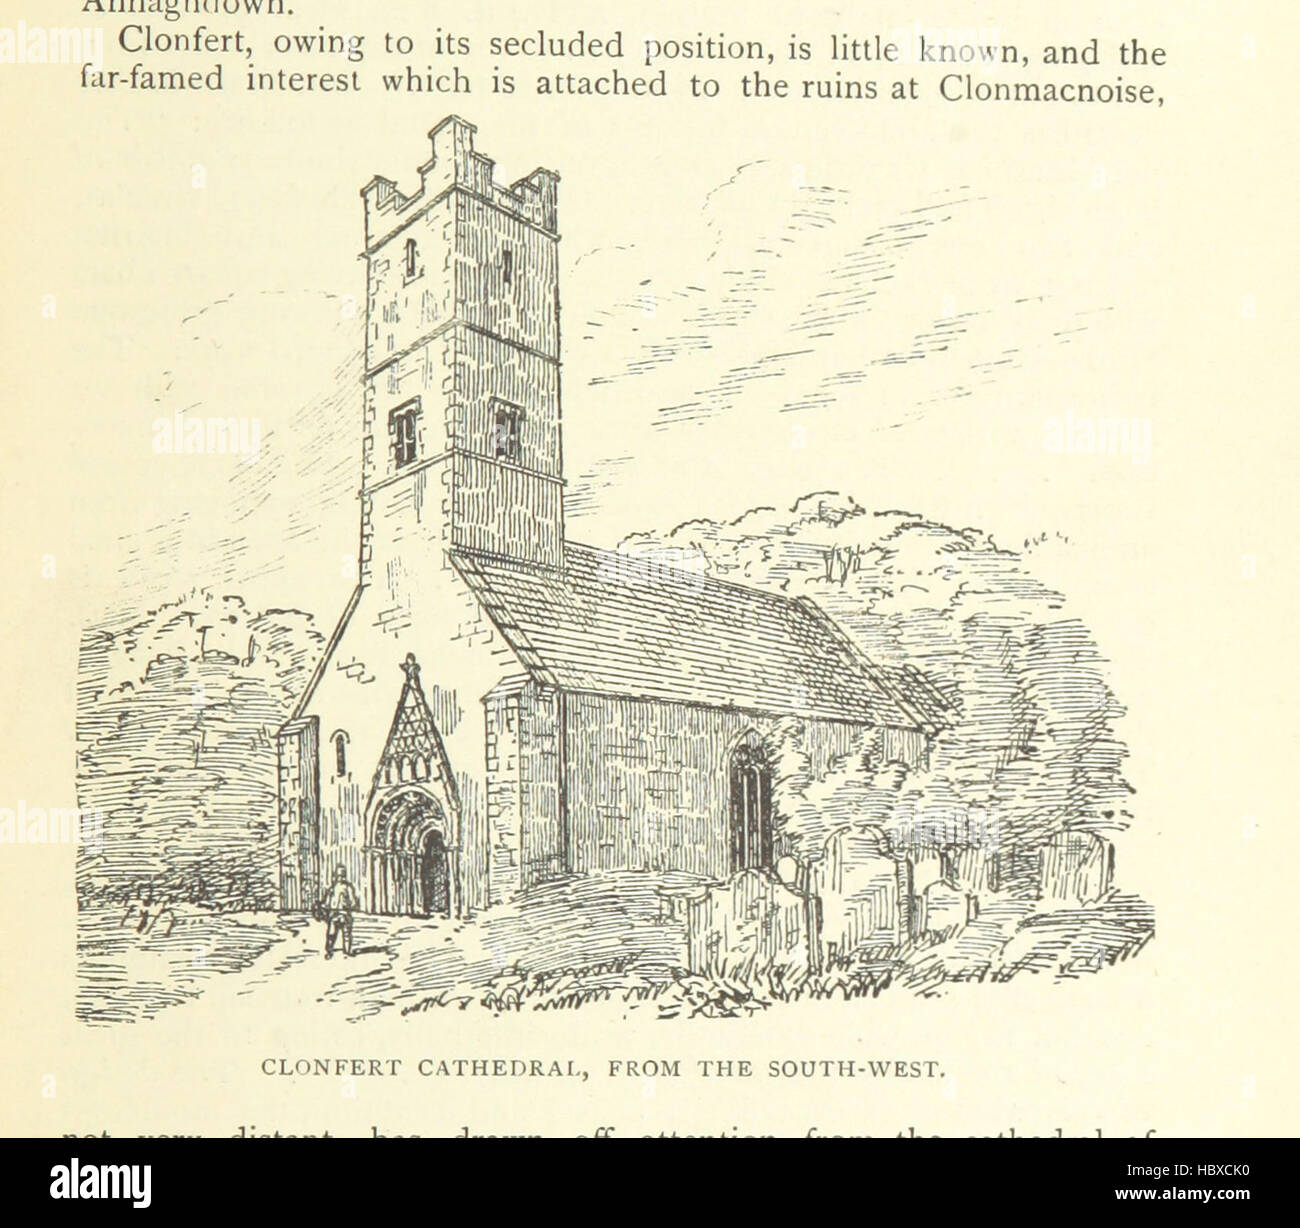 Image taken from page 95 of 'The Cathedral Churches of Ireland: being notes, more especially on the smaller and less known of those churches, etc' Image taken from page 95 of 'The Cathedral Churches of Stock Photo